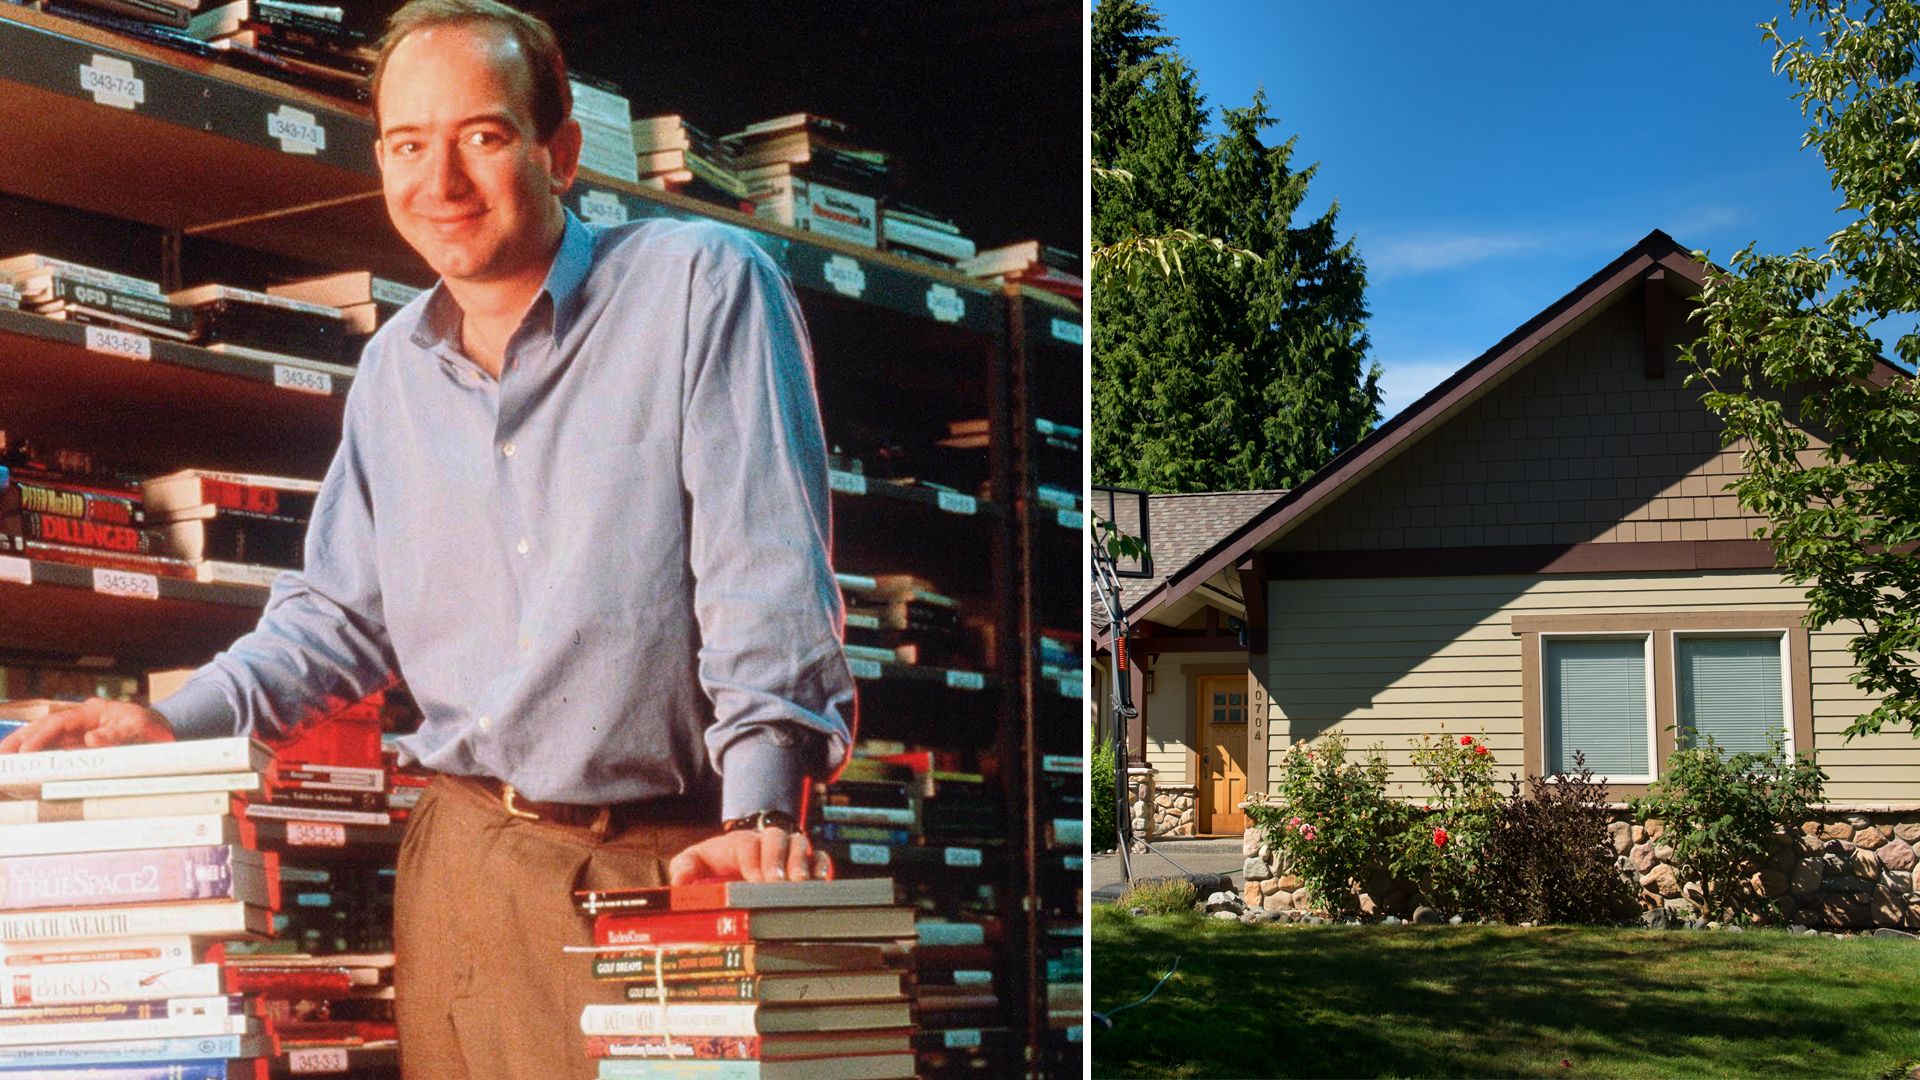 Jeff Bezos' rented home in Seattle